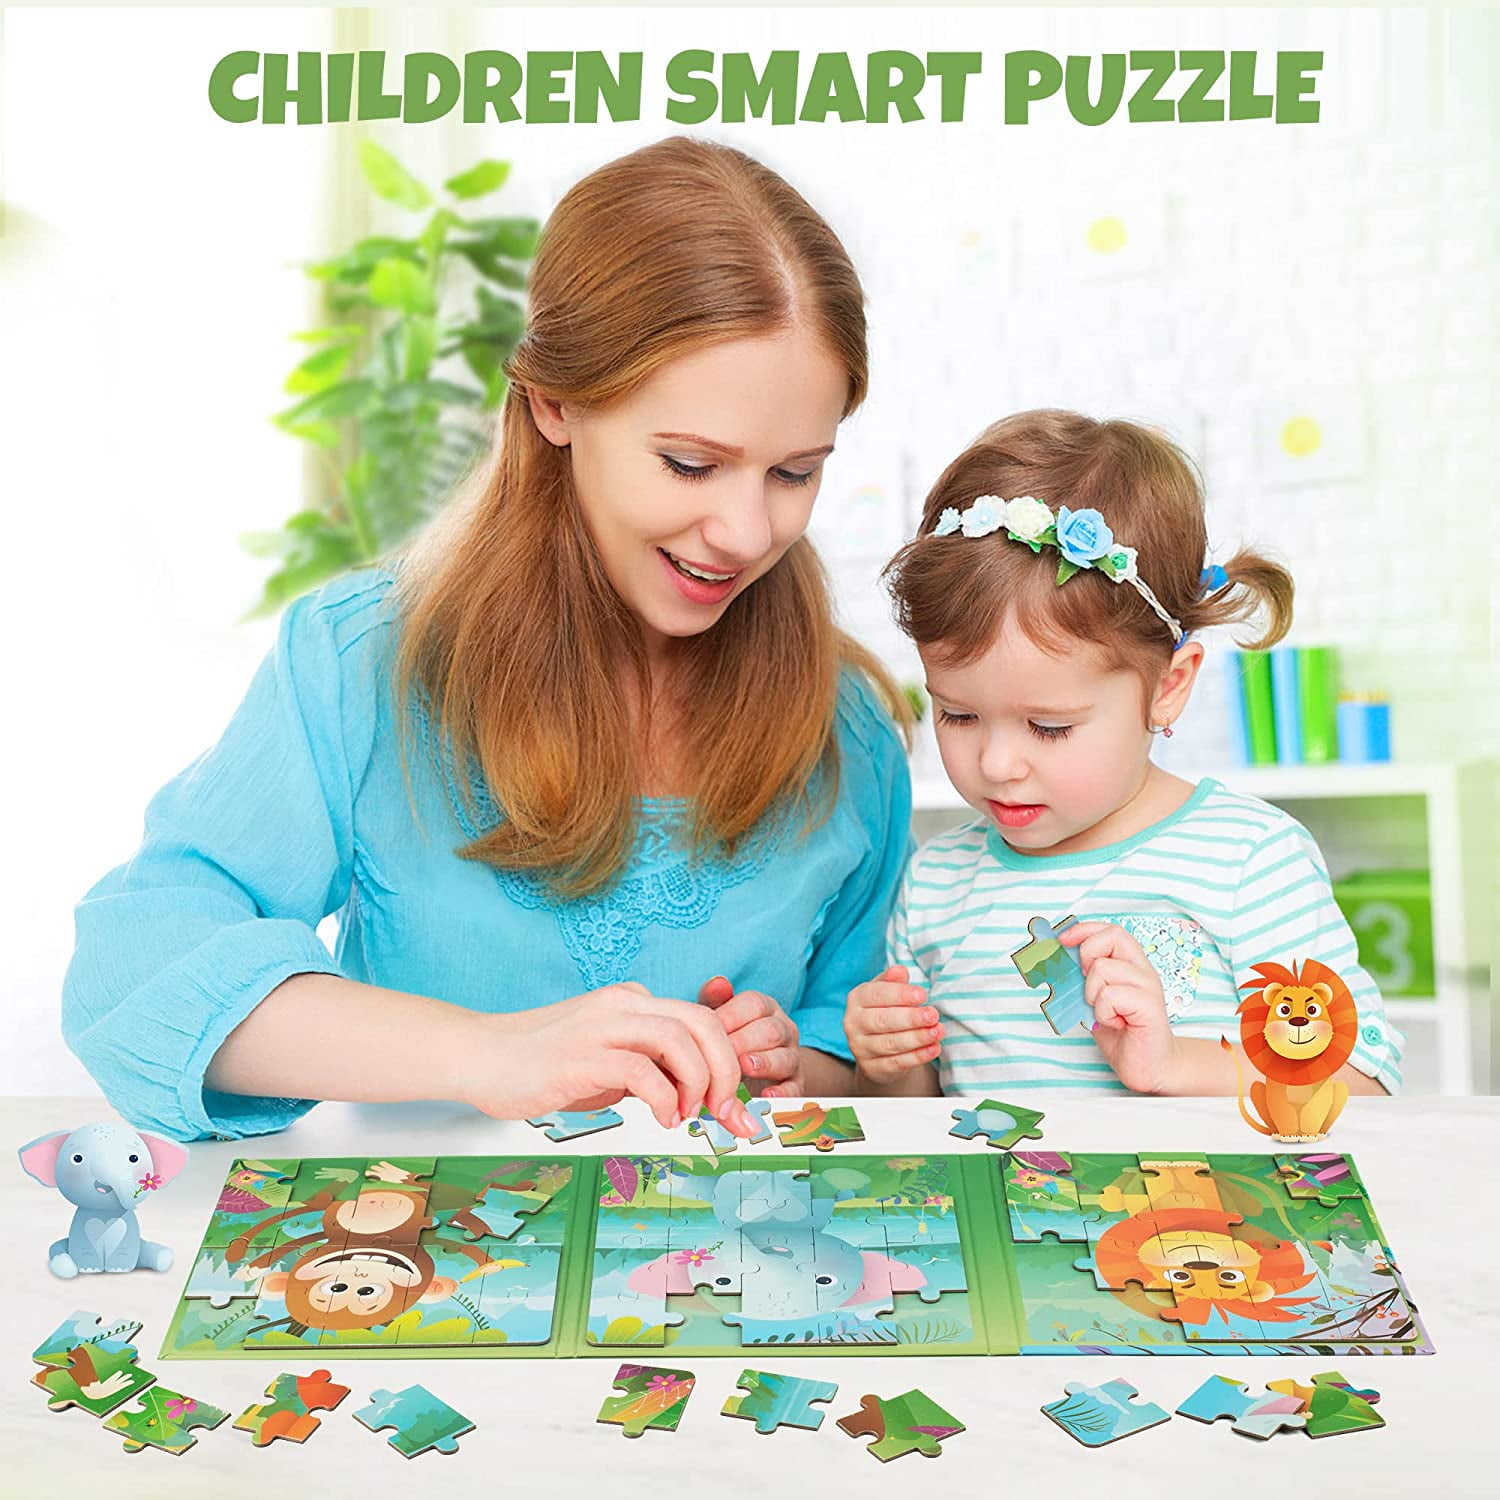 SYNARRY Wooden Dinosaur Puzzles for Kids Ages 3-5, 4 Packs 24 PCs Jigsaw  Puzzles Preschool Educational Brain Teaser Boards Toys Gifts for Children